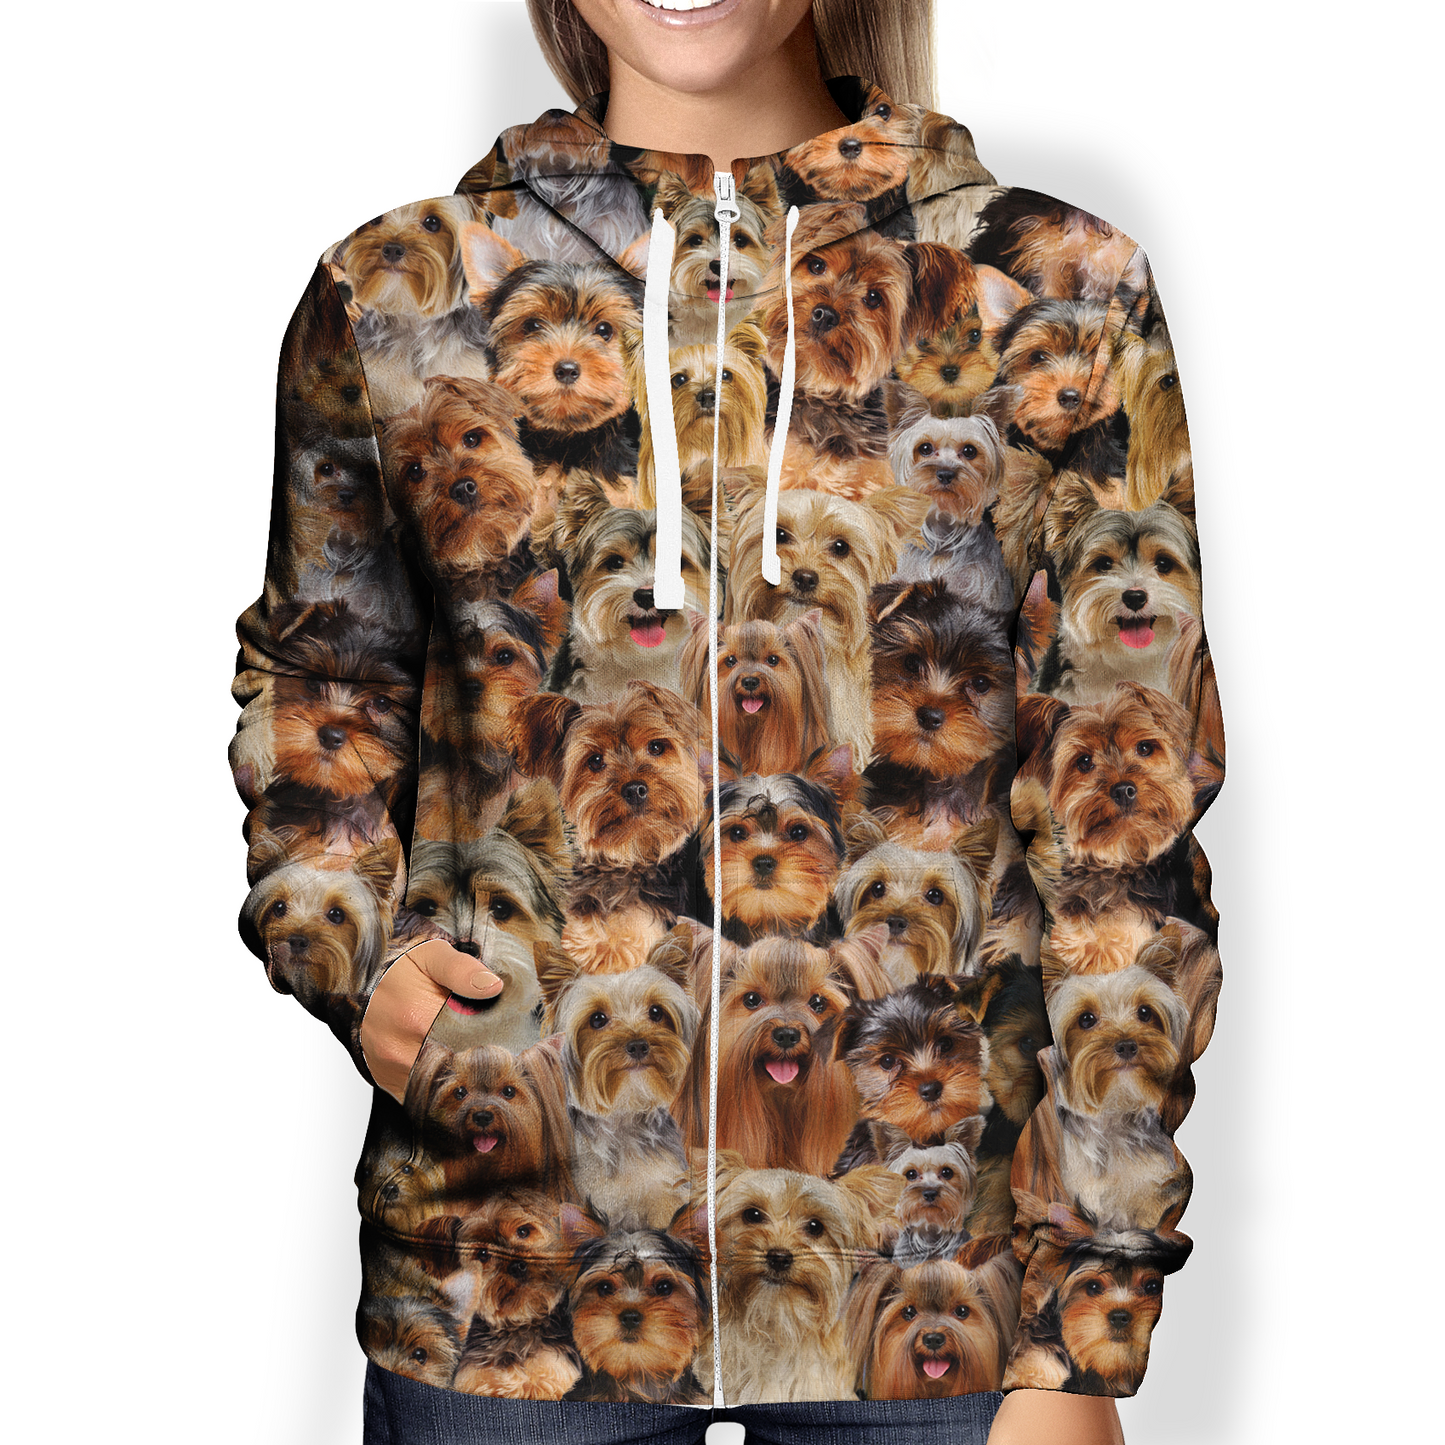 You Will Have A Bunch Of Yorkshire Terriers - Hoodie V1